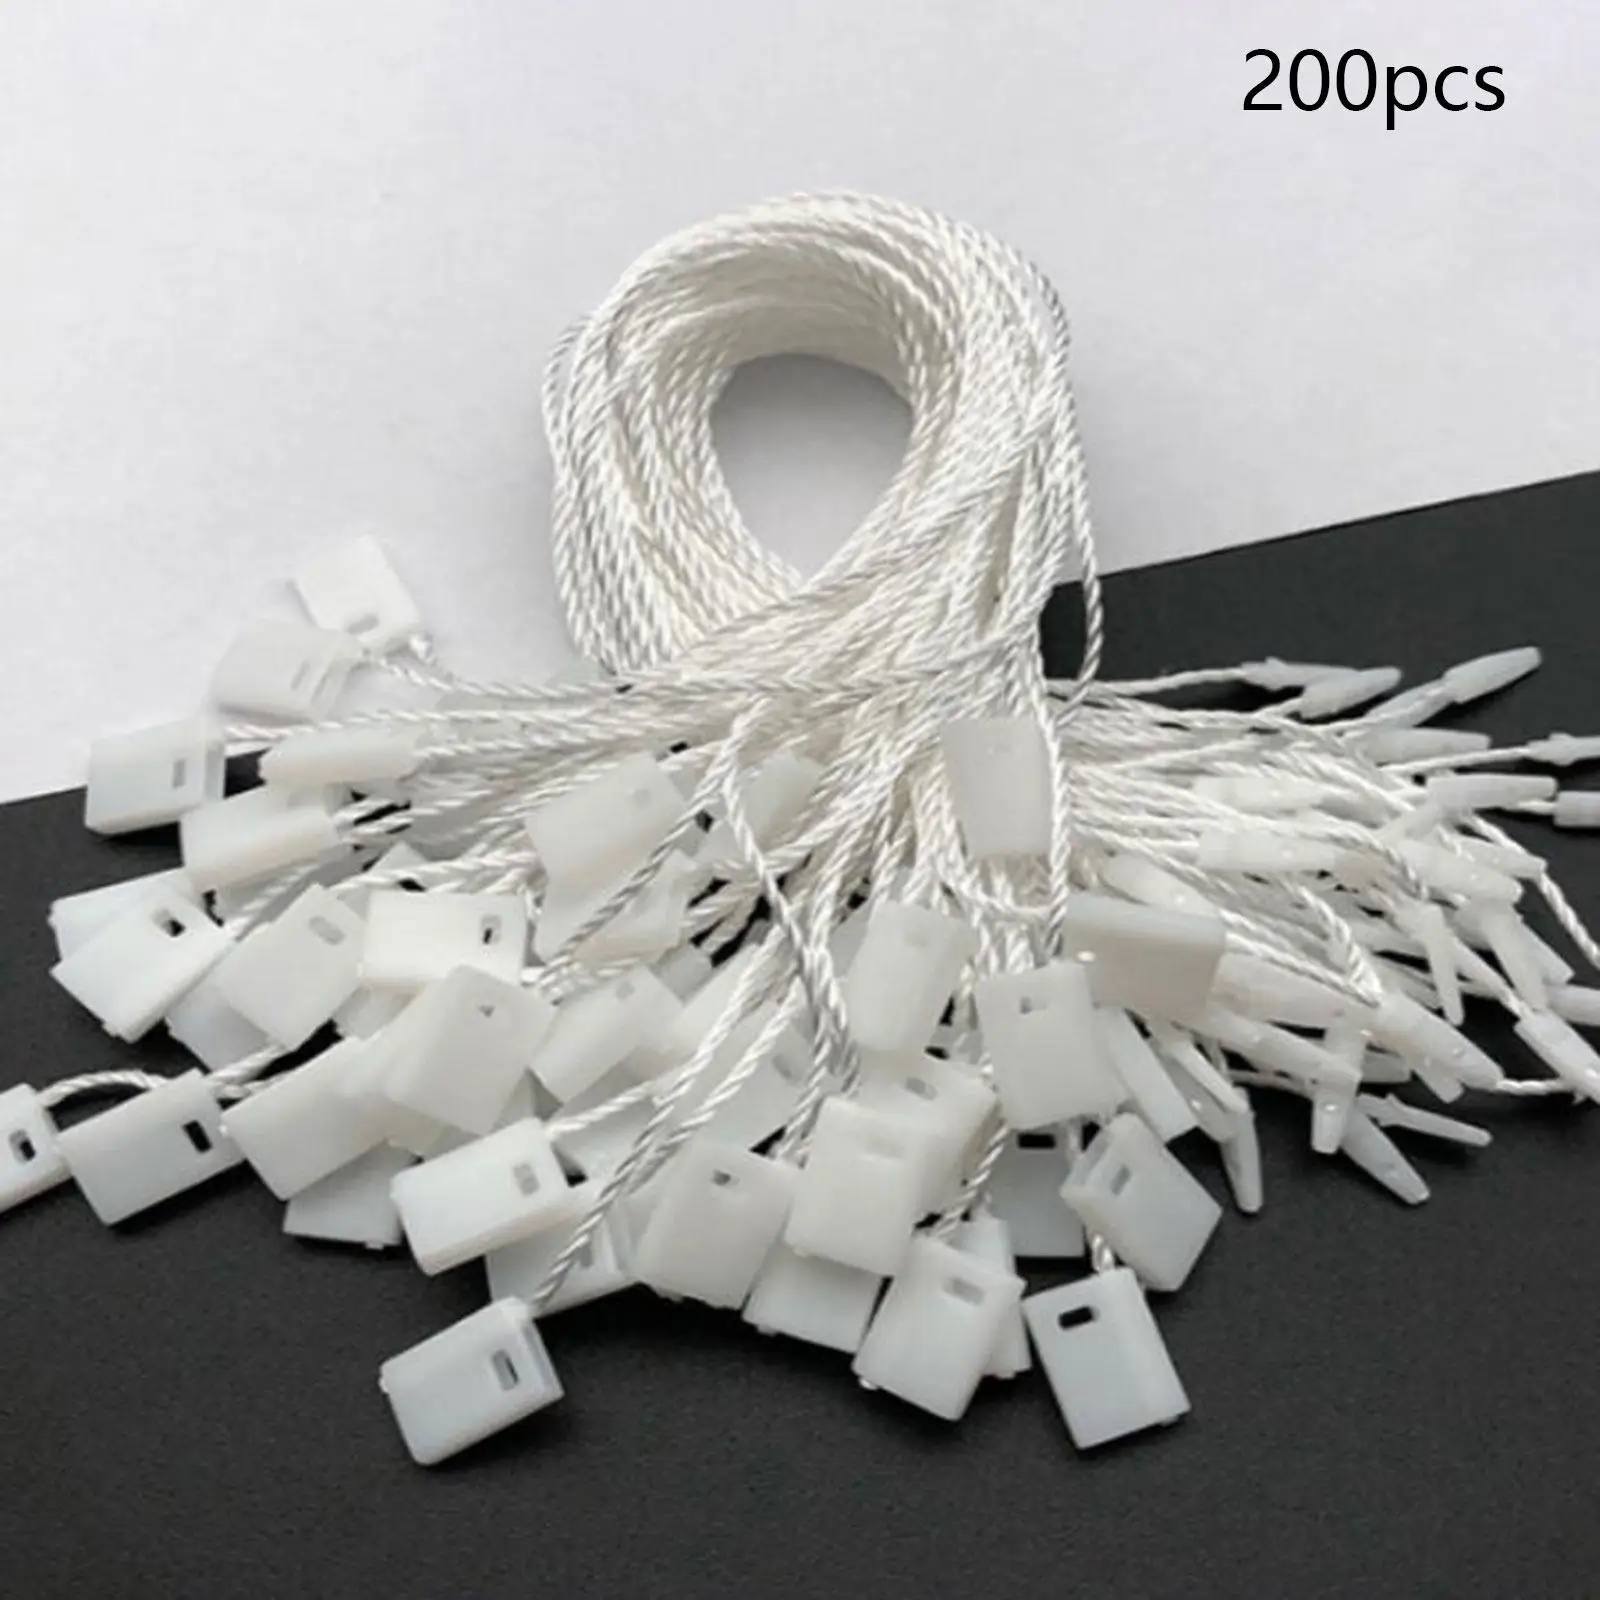 200x Hang Tag Strings Snap Lock Lightweight Fast to Attach Durable Portable Fastener Ties for Gift Tags Toys Belt Luggage Shoes